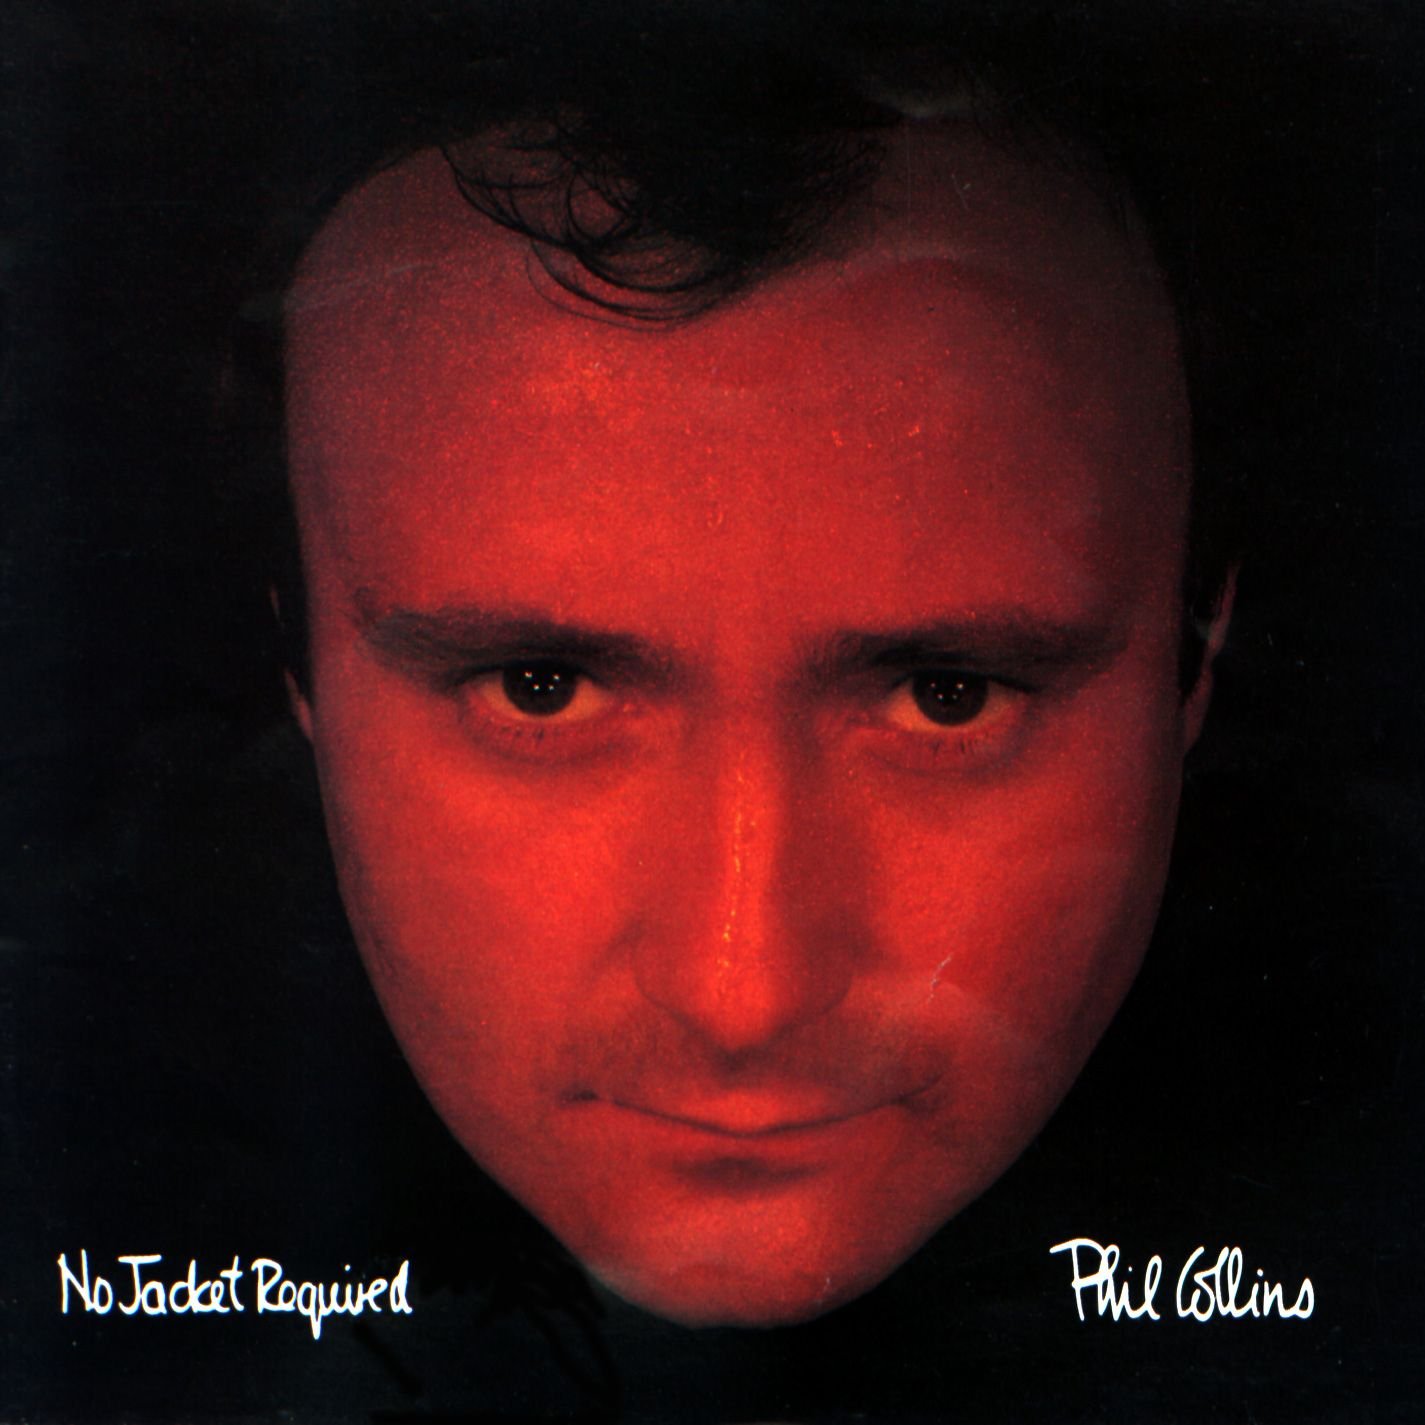 50 Years, 50 Albums 1985: Phil Collins ‘No Jacket Required’